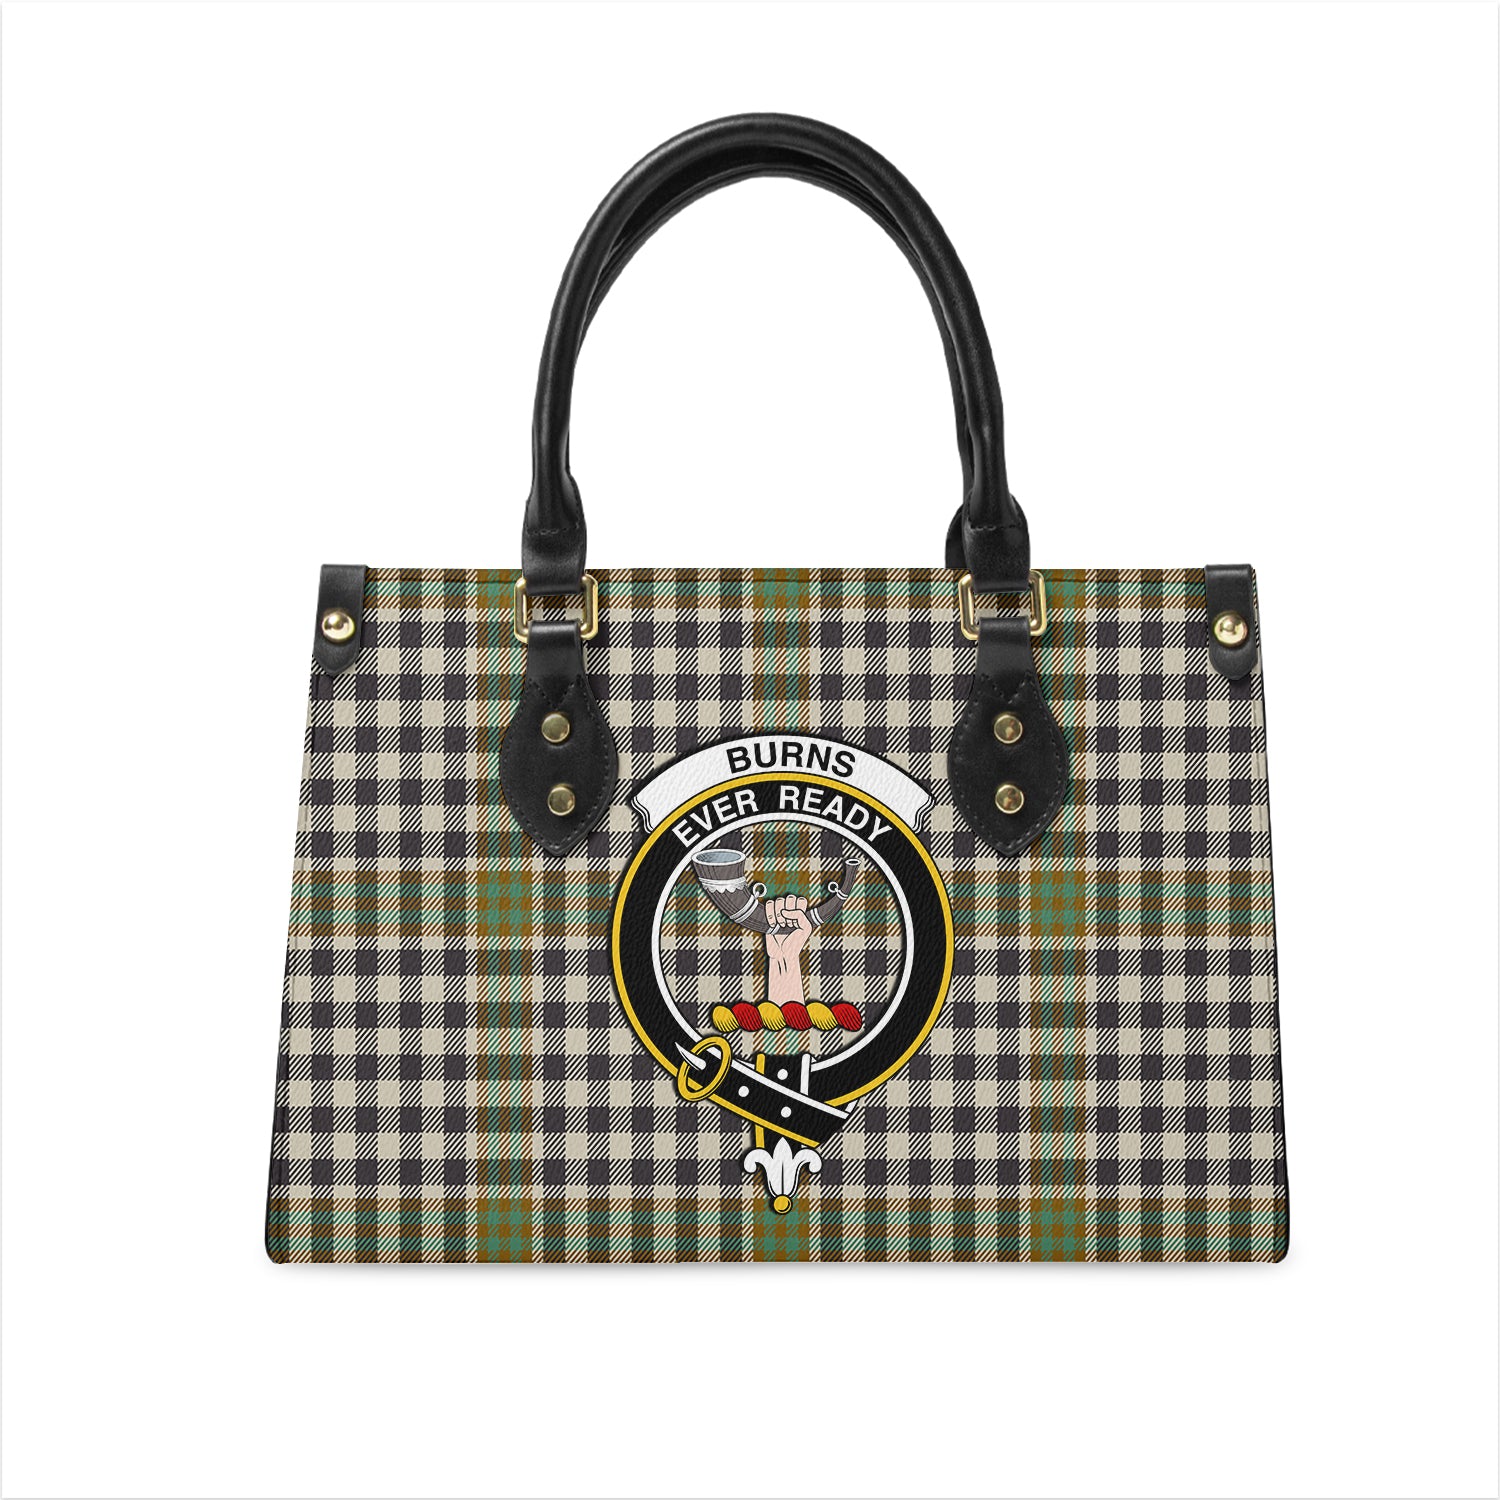 Burns Check Tartan Leather Bag with Family Crest One Size 29*11*20 cm